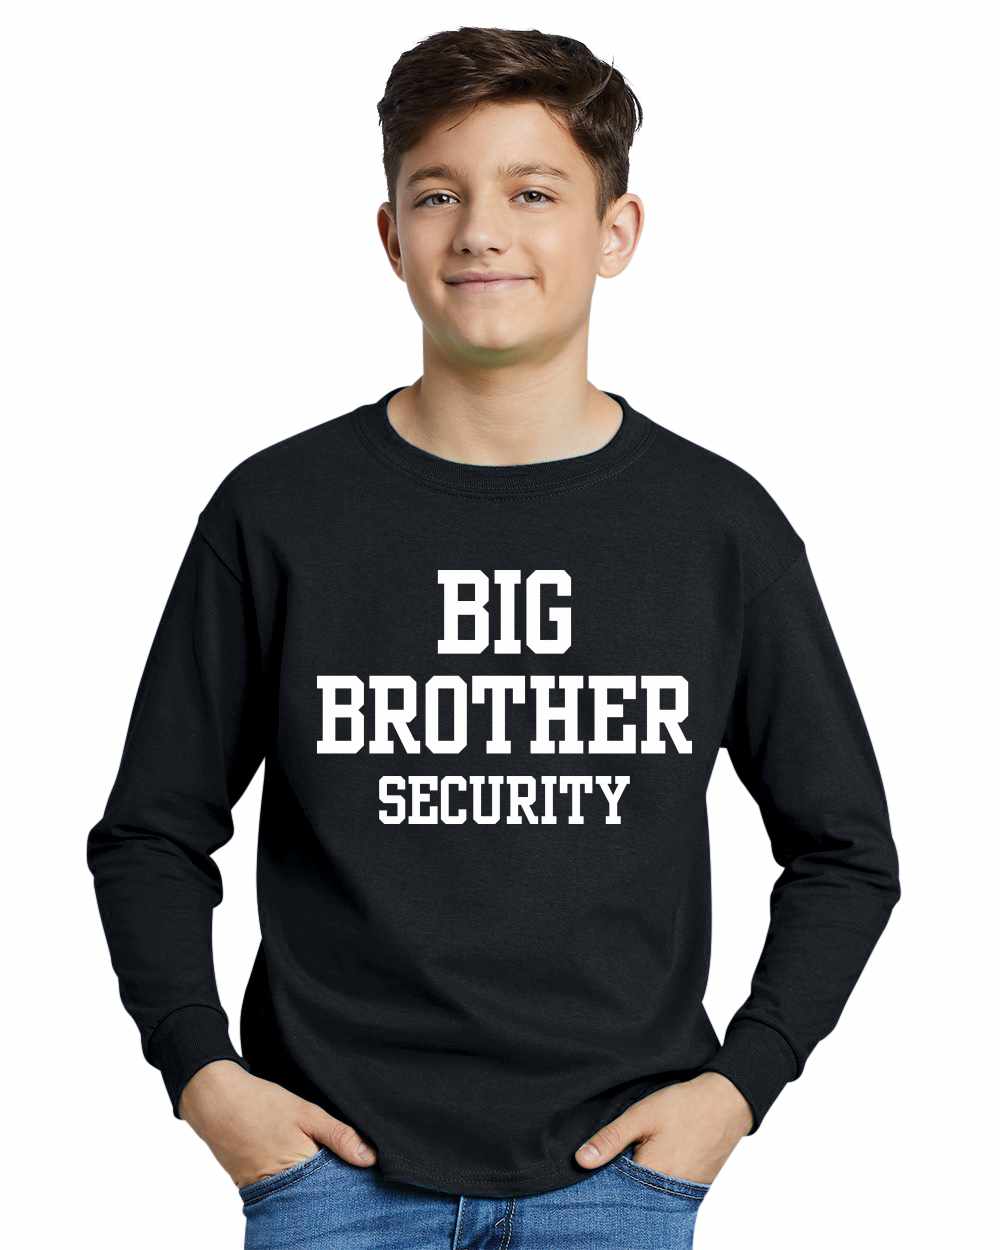 Big Brother Security on Youth Long Sleeve Shirt (#1136-203)